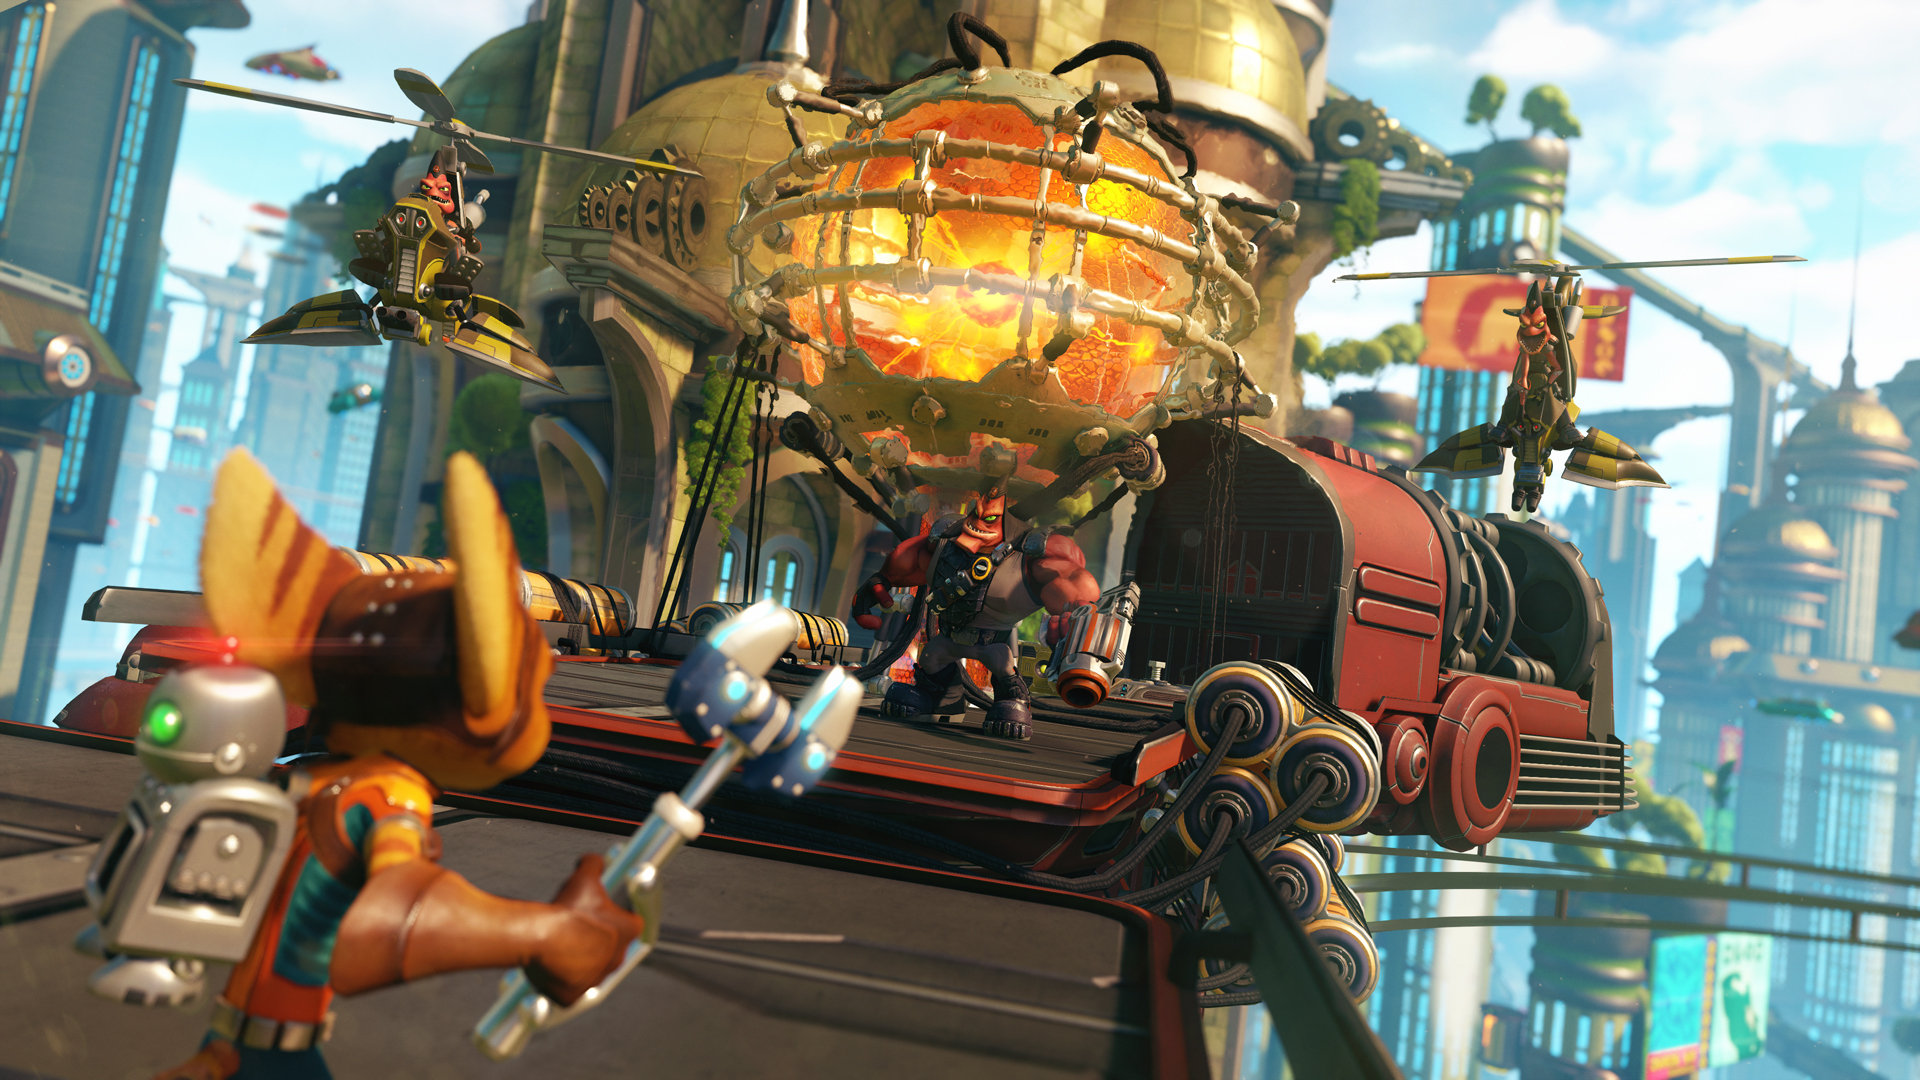 Ratchet and Clank PS4 